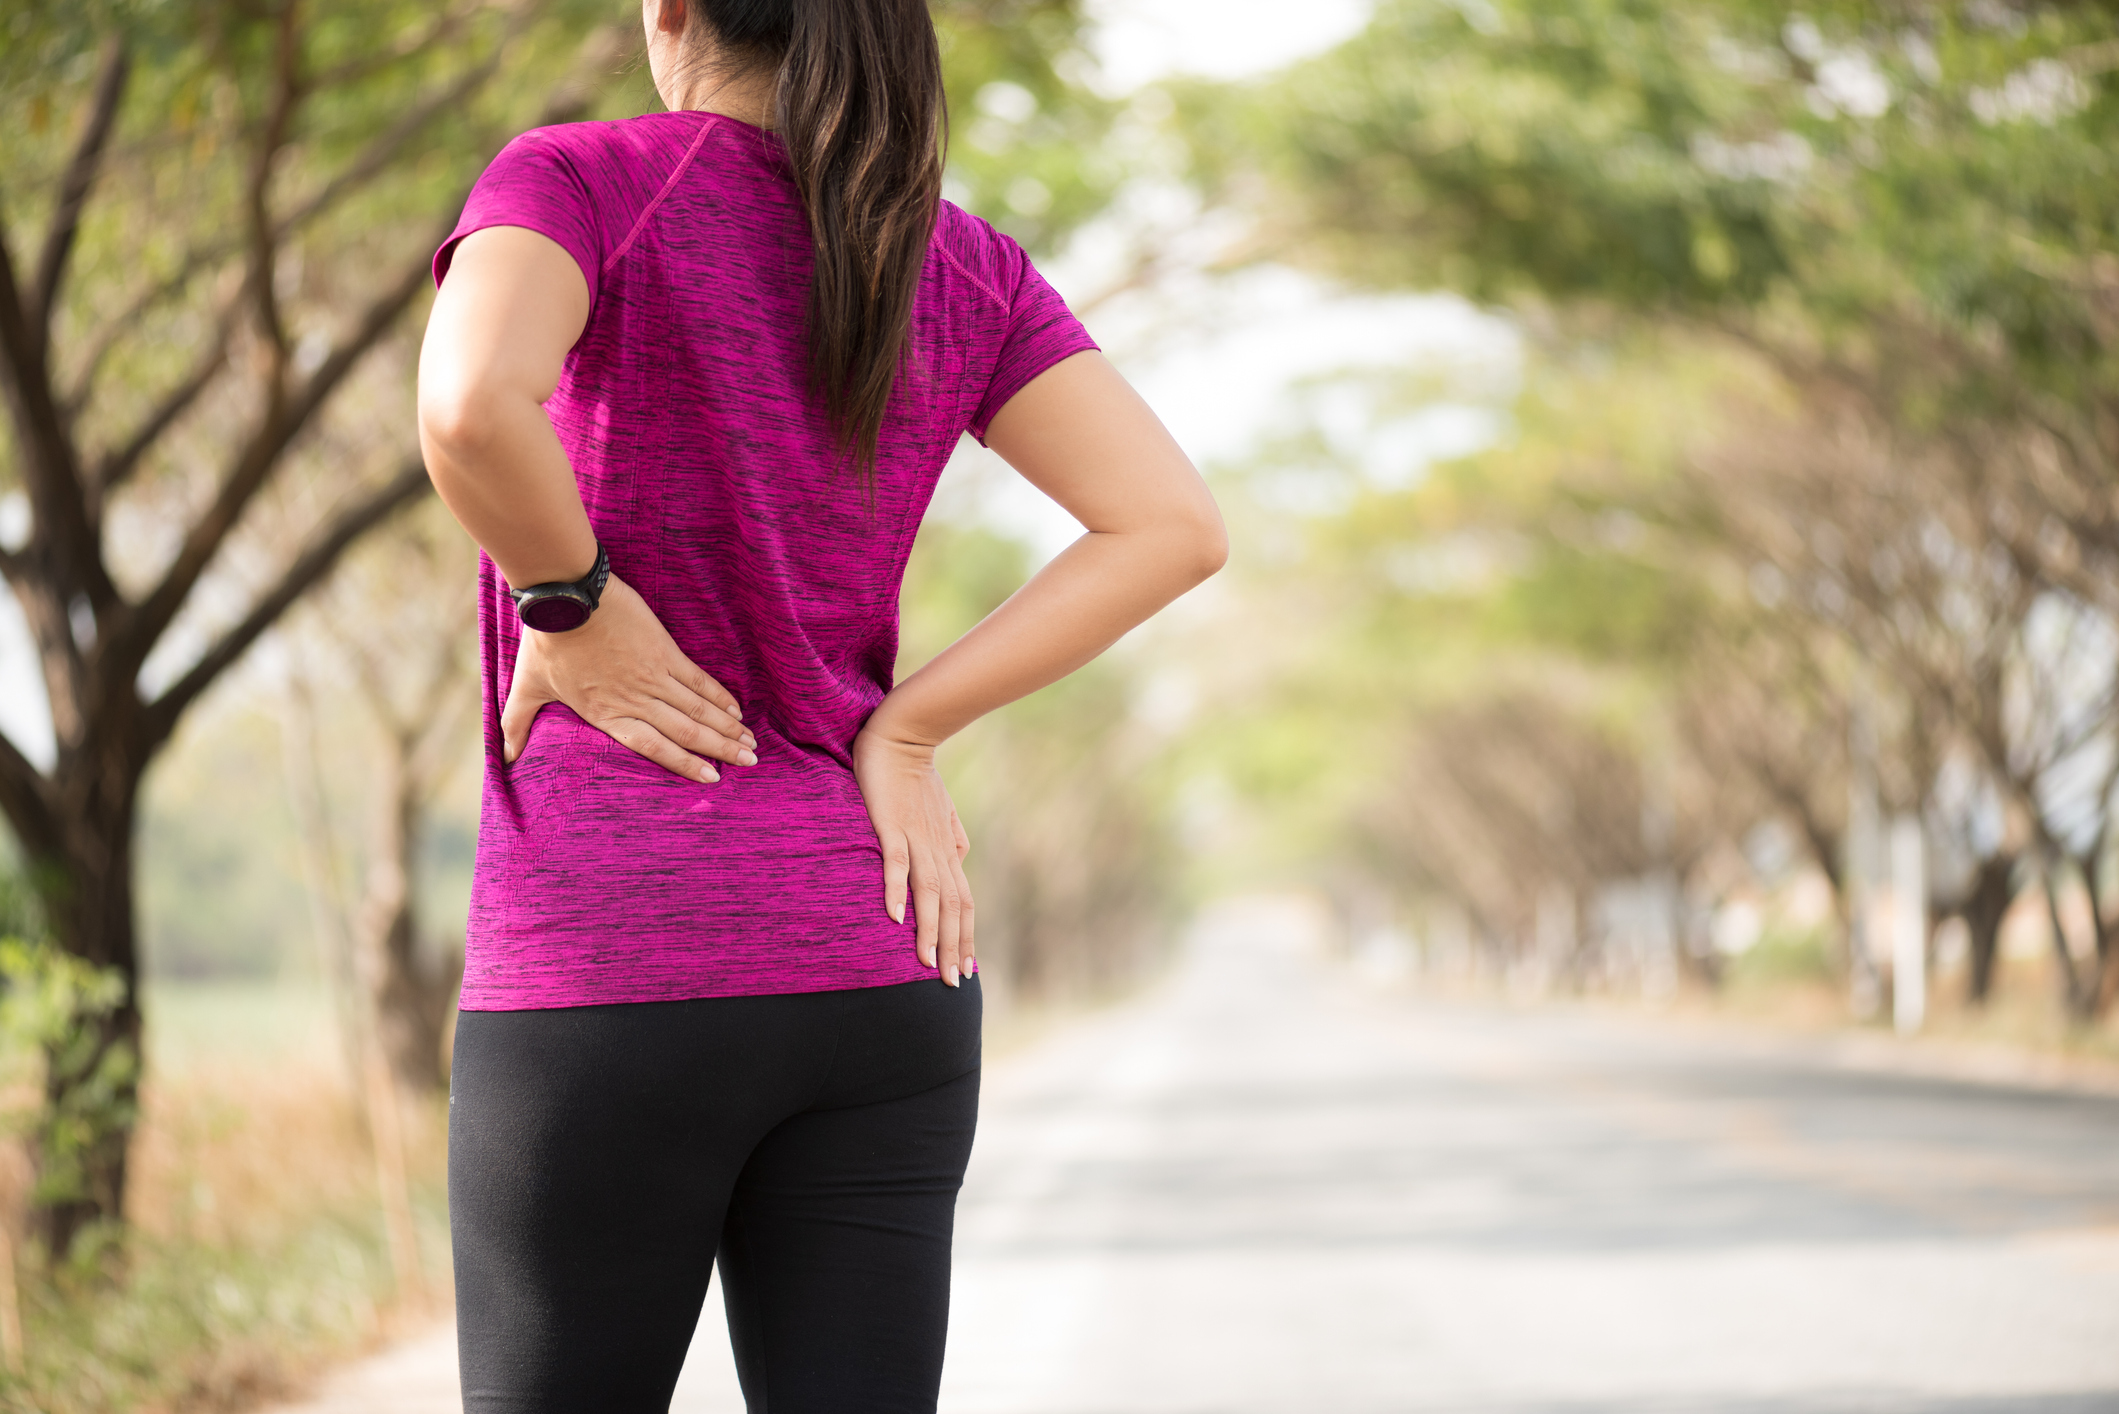 ​6 Common Injuries You Should Never Try to Train Through